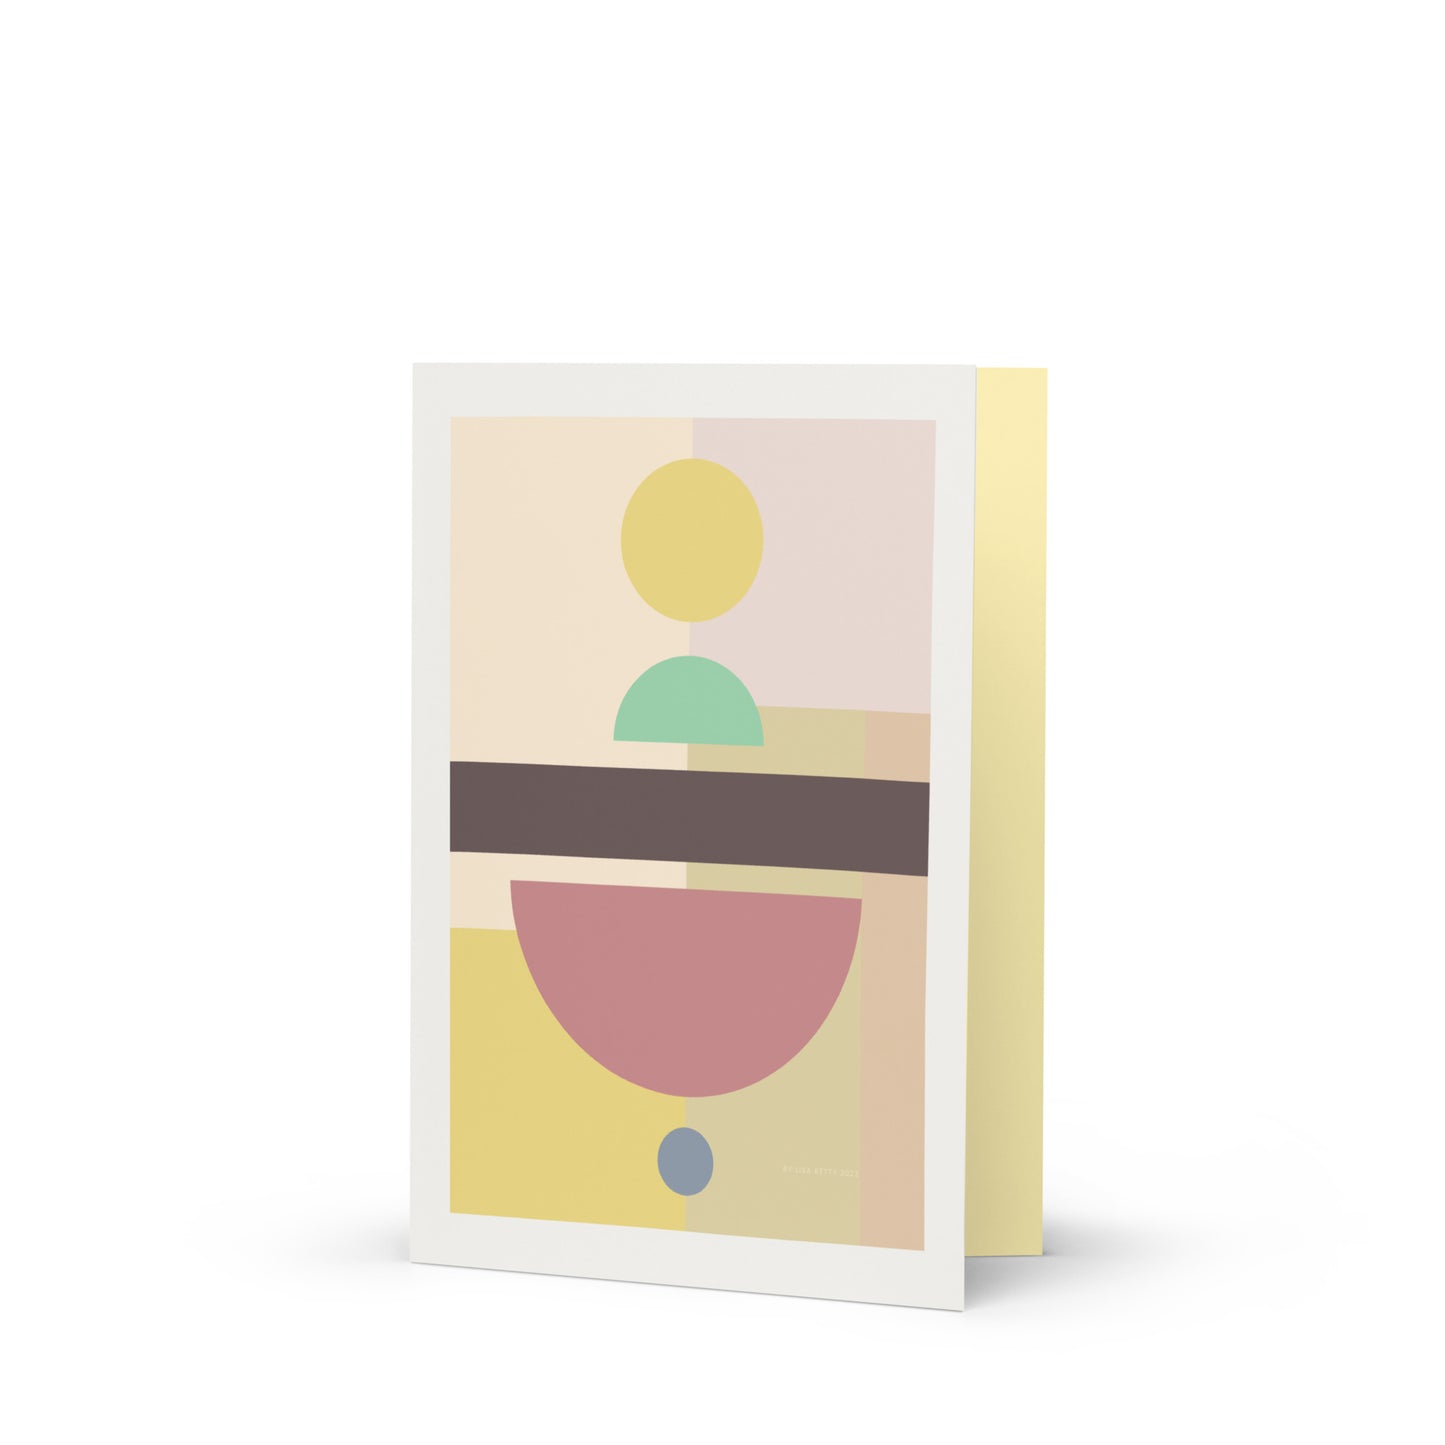 The Rattle Greeting card